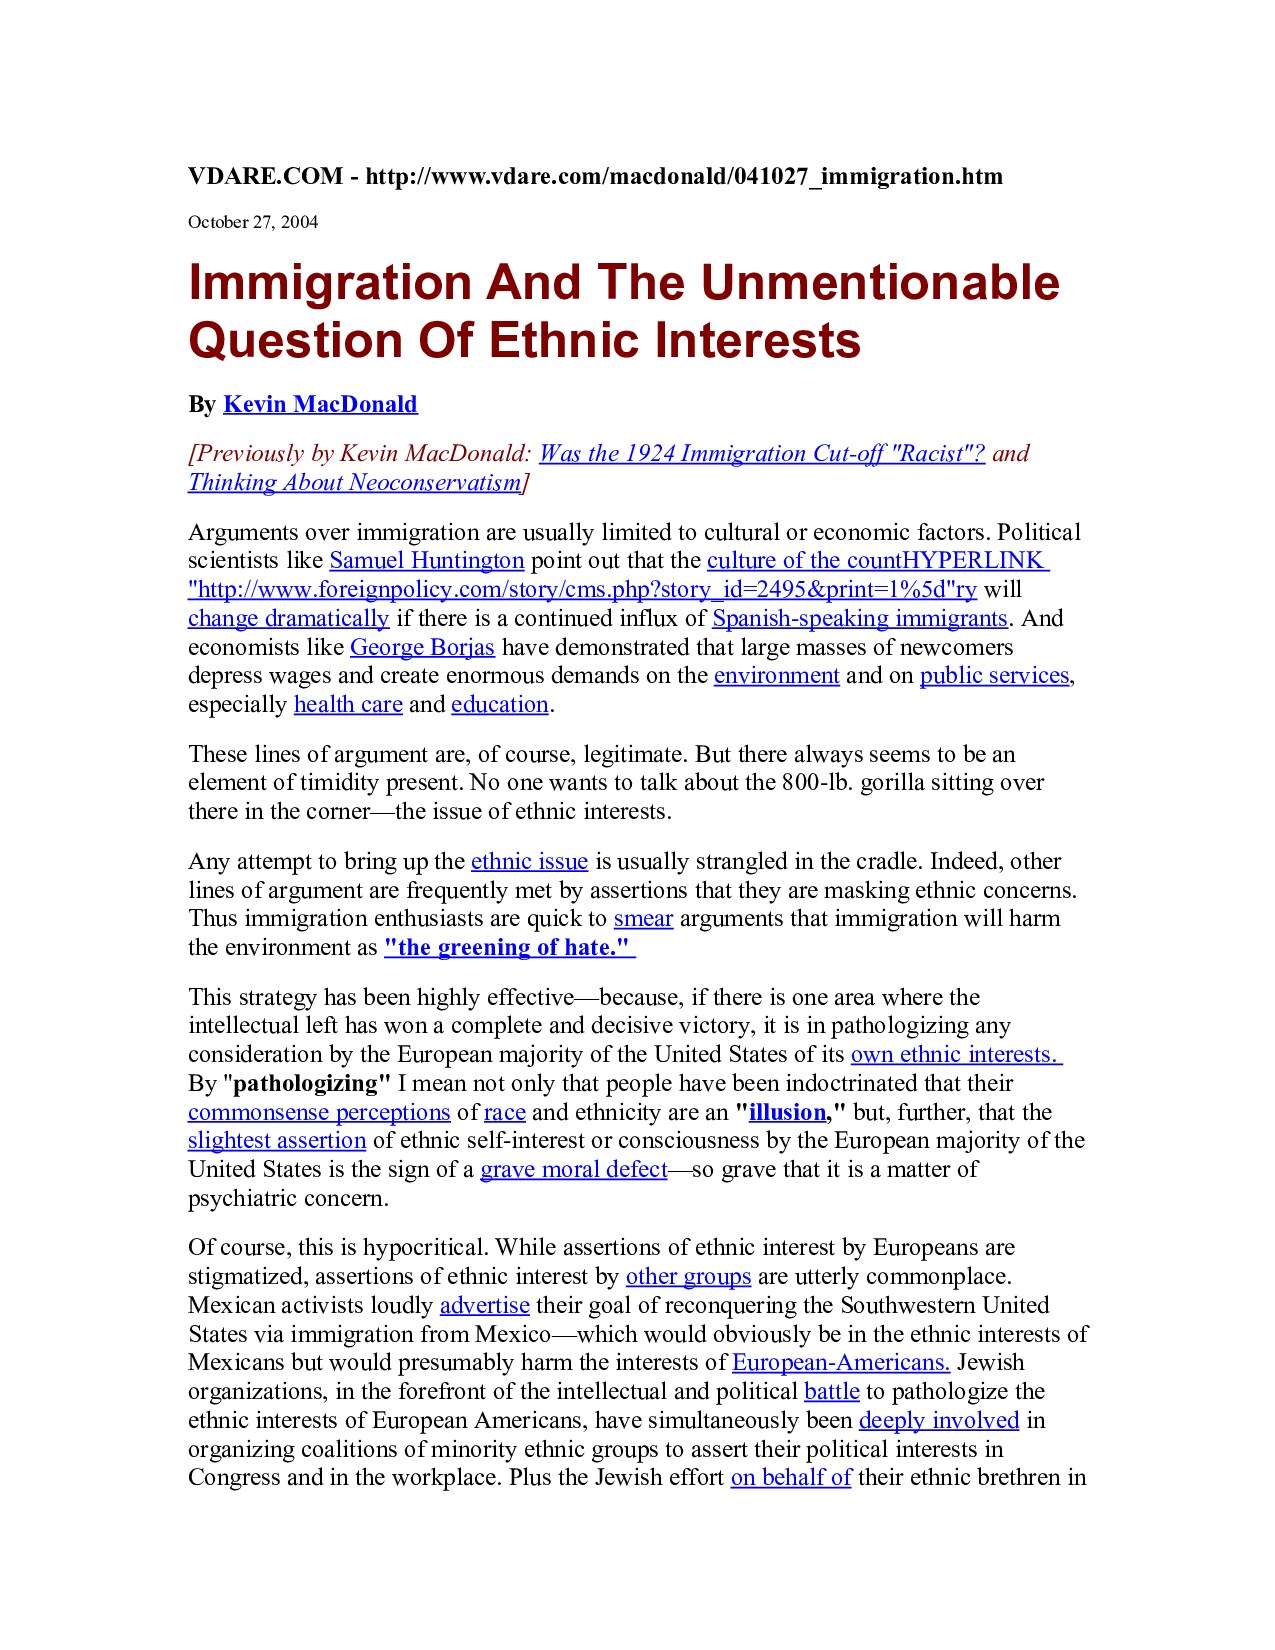 MacDonald, Kevin; Immigration And The Unmentionable Question Of Ethnic Interests